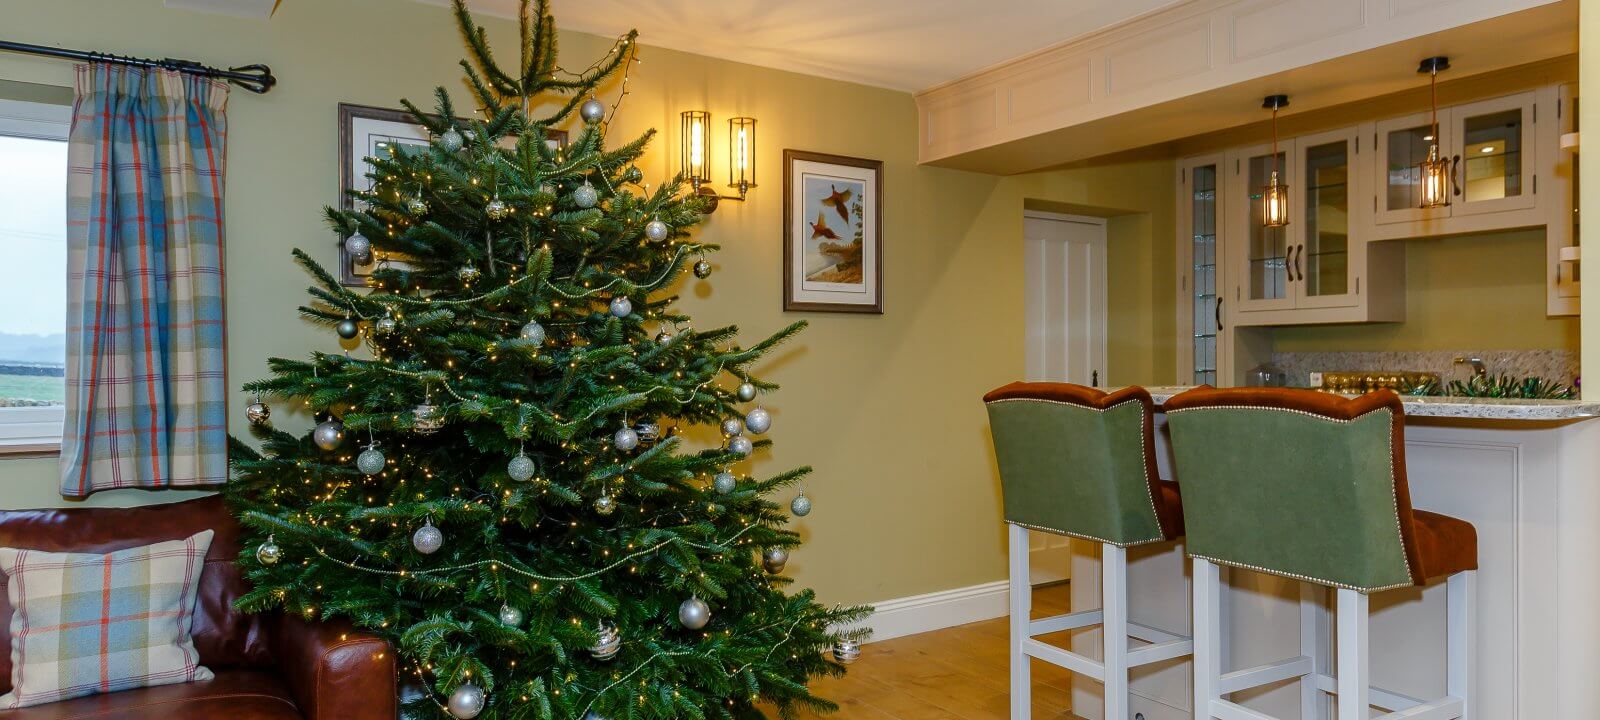 Christmas tree in lounge showing bar area